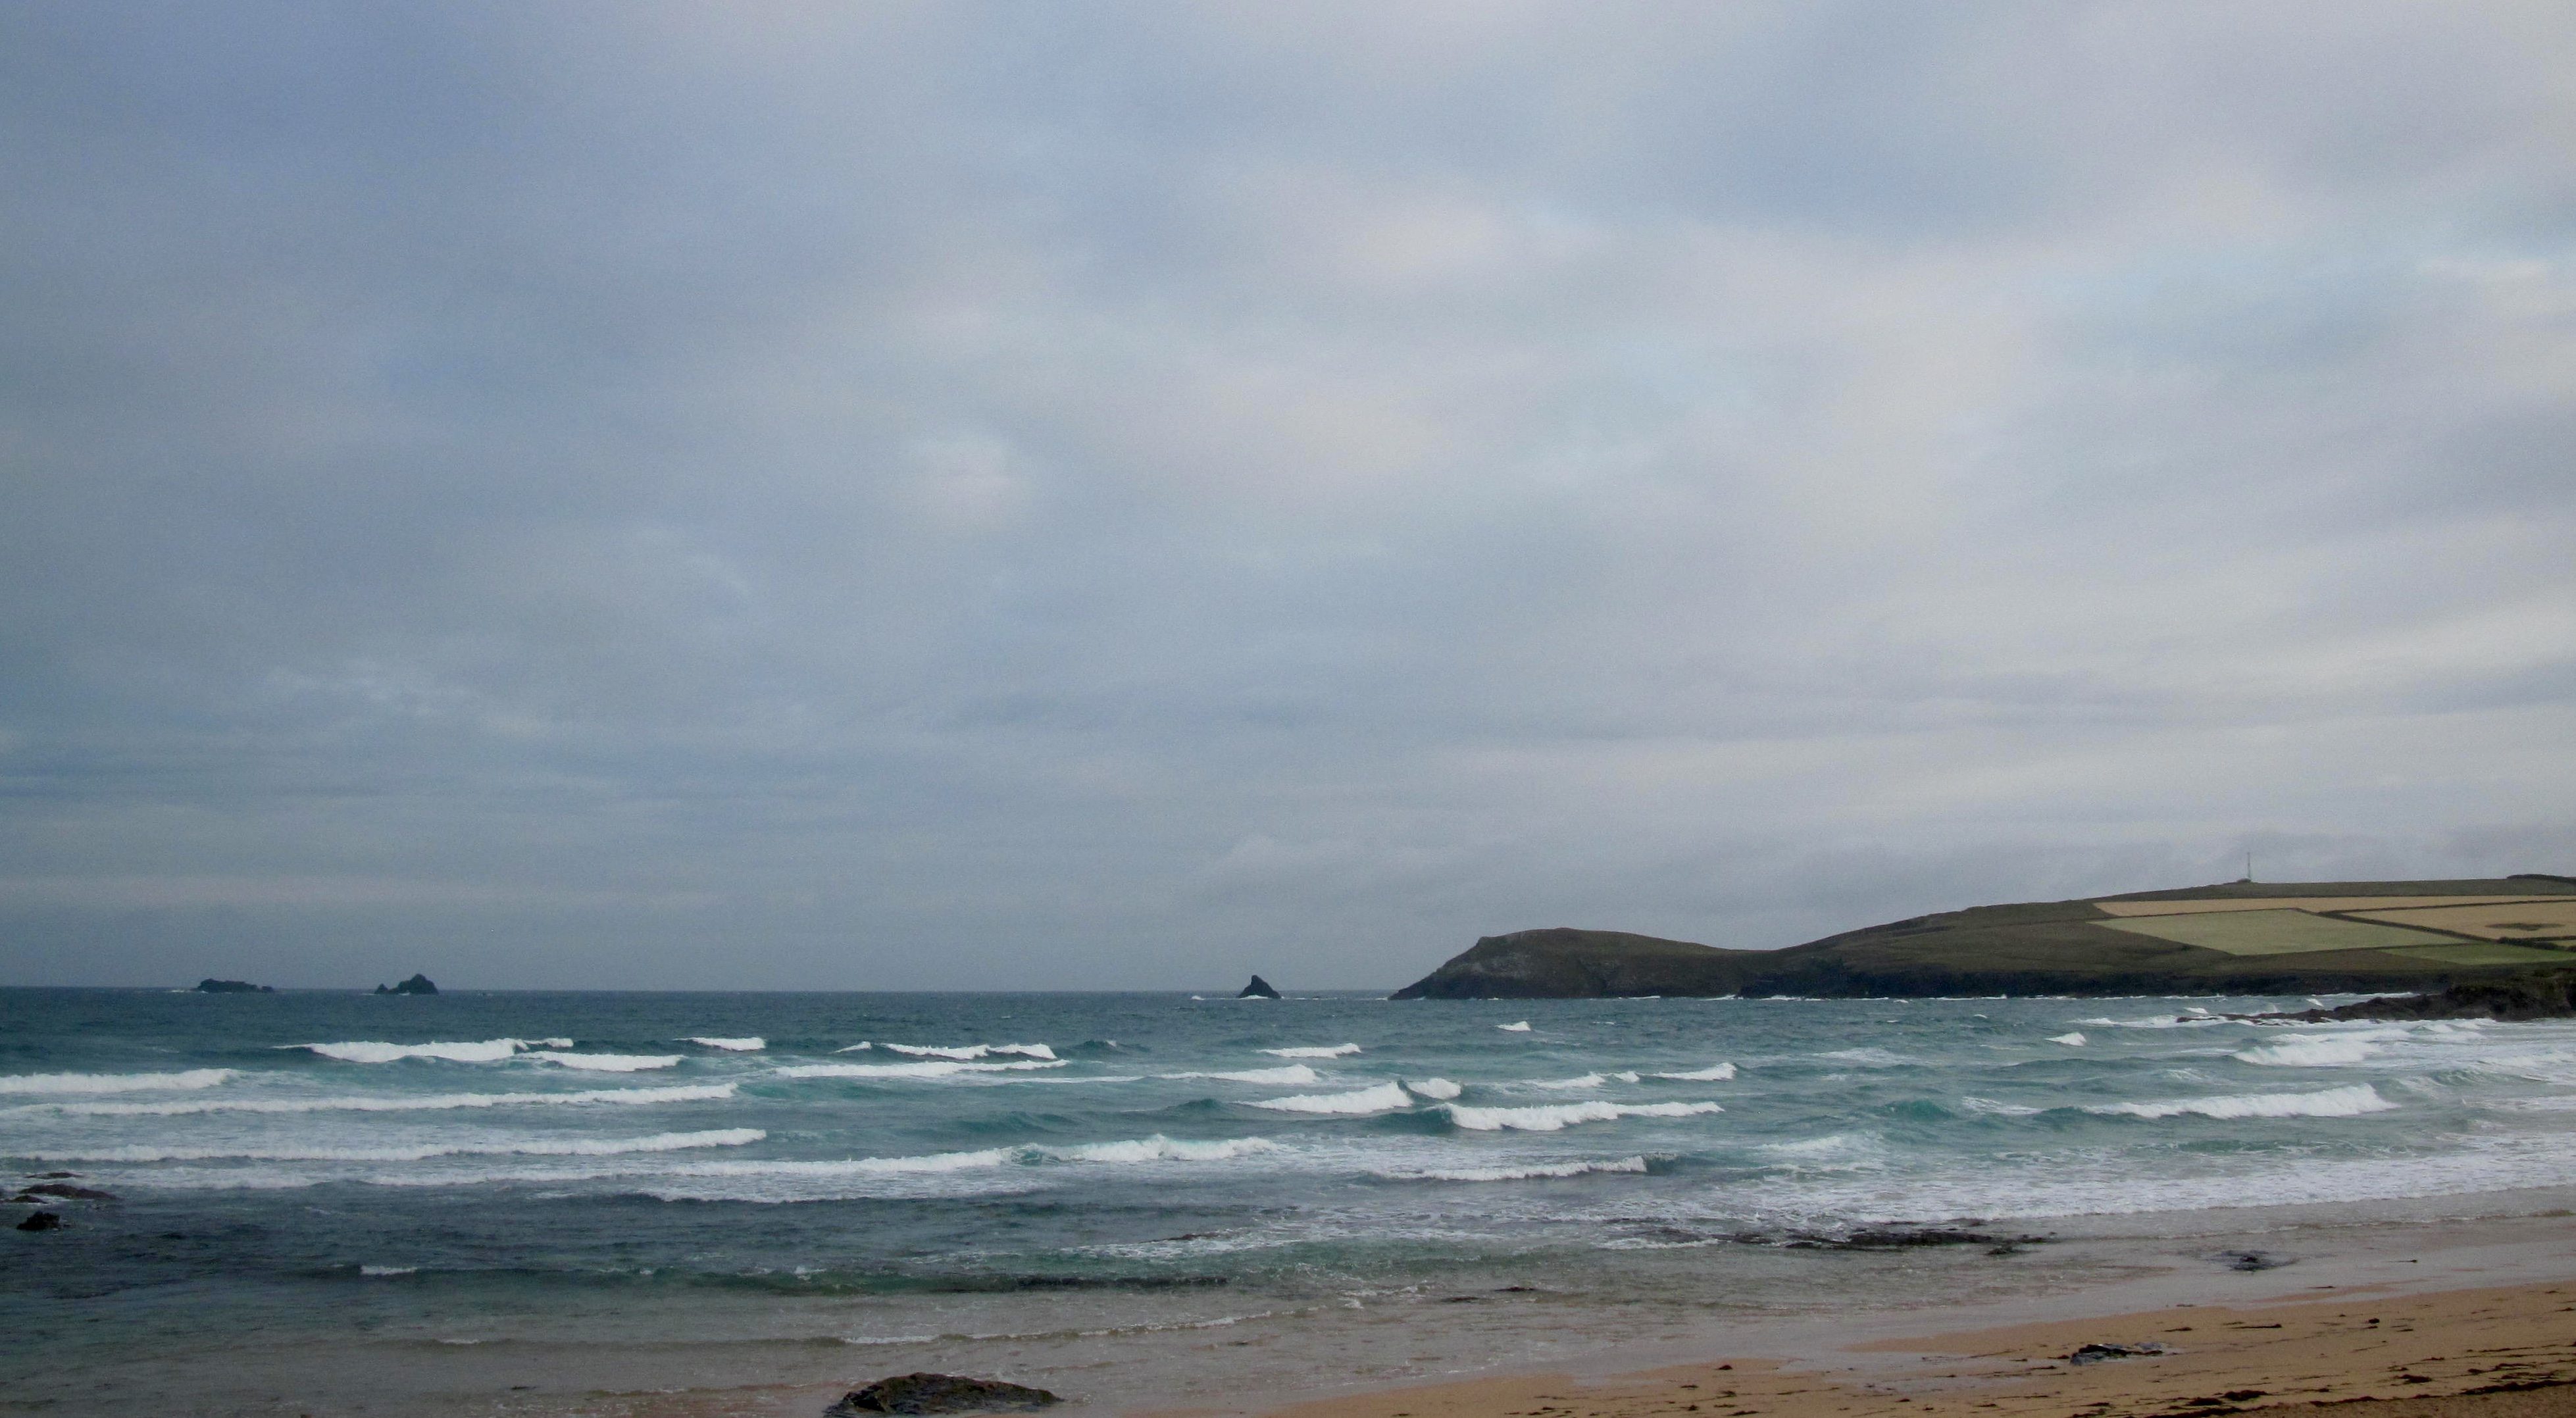 Surf Report for Tuesday 14th July 2015